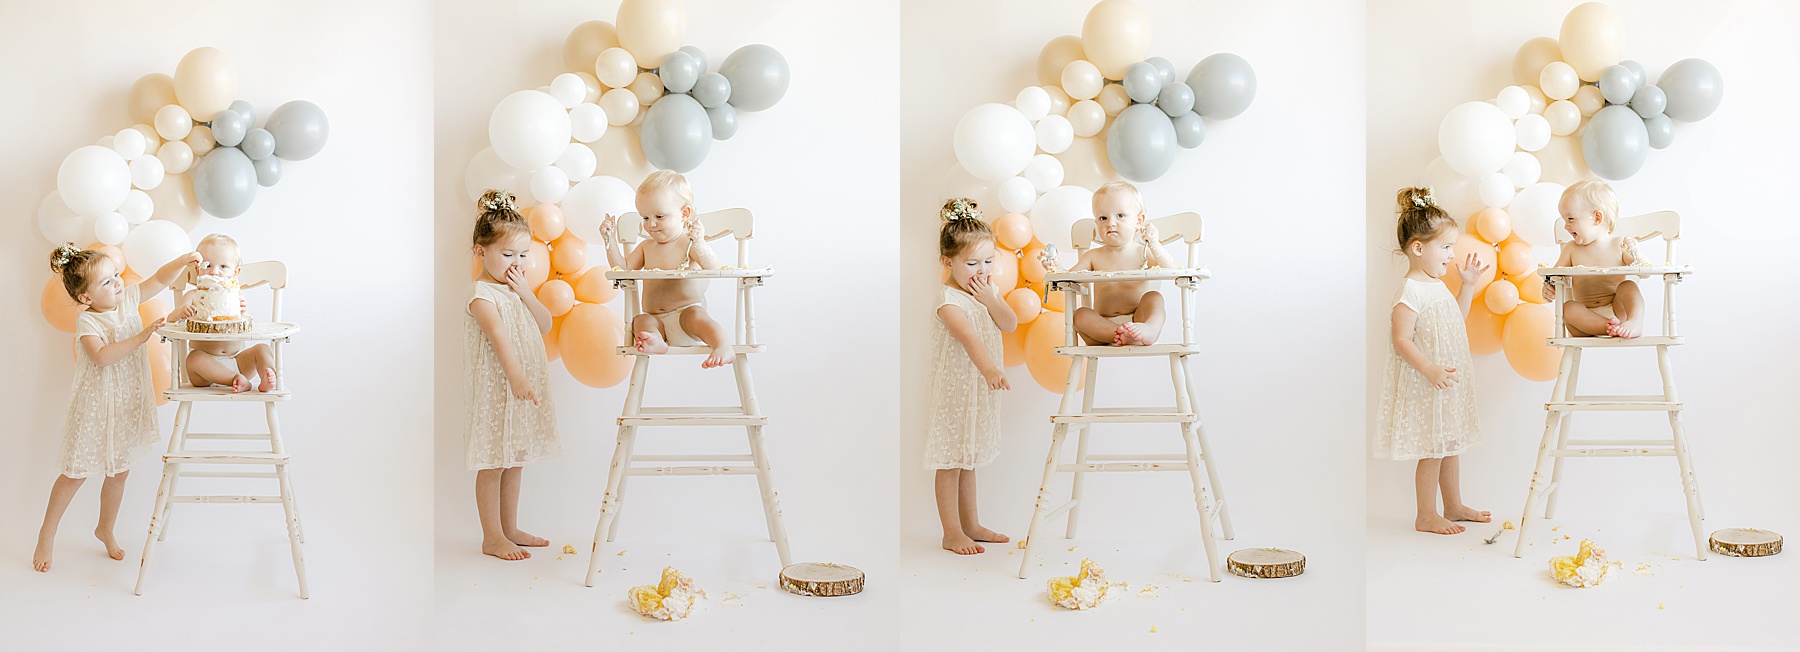 series of cake smash photo with baby boy and little girl in neutral clothing